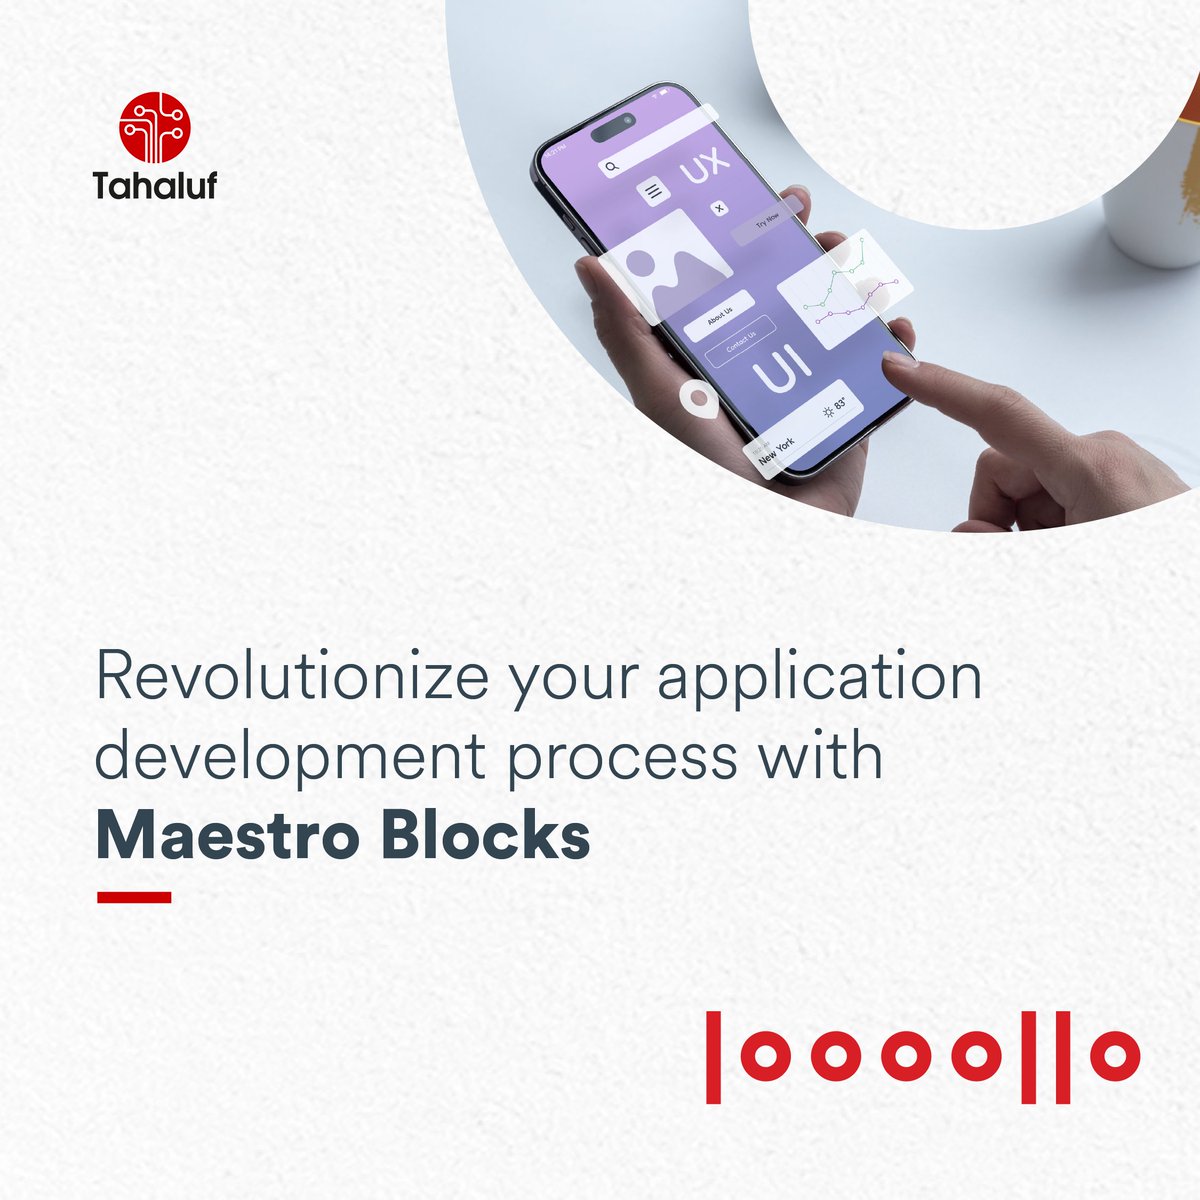 Maestro Blocks simplifies app development, by eliminating coding hassles and empowering developers to concentrate on app innovation.

With its intuitive drag-and-drop interface and an array of ready-to-use components, you can quickly turn your app visions into reality.

Say…